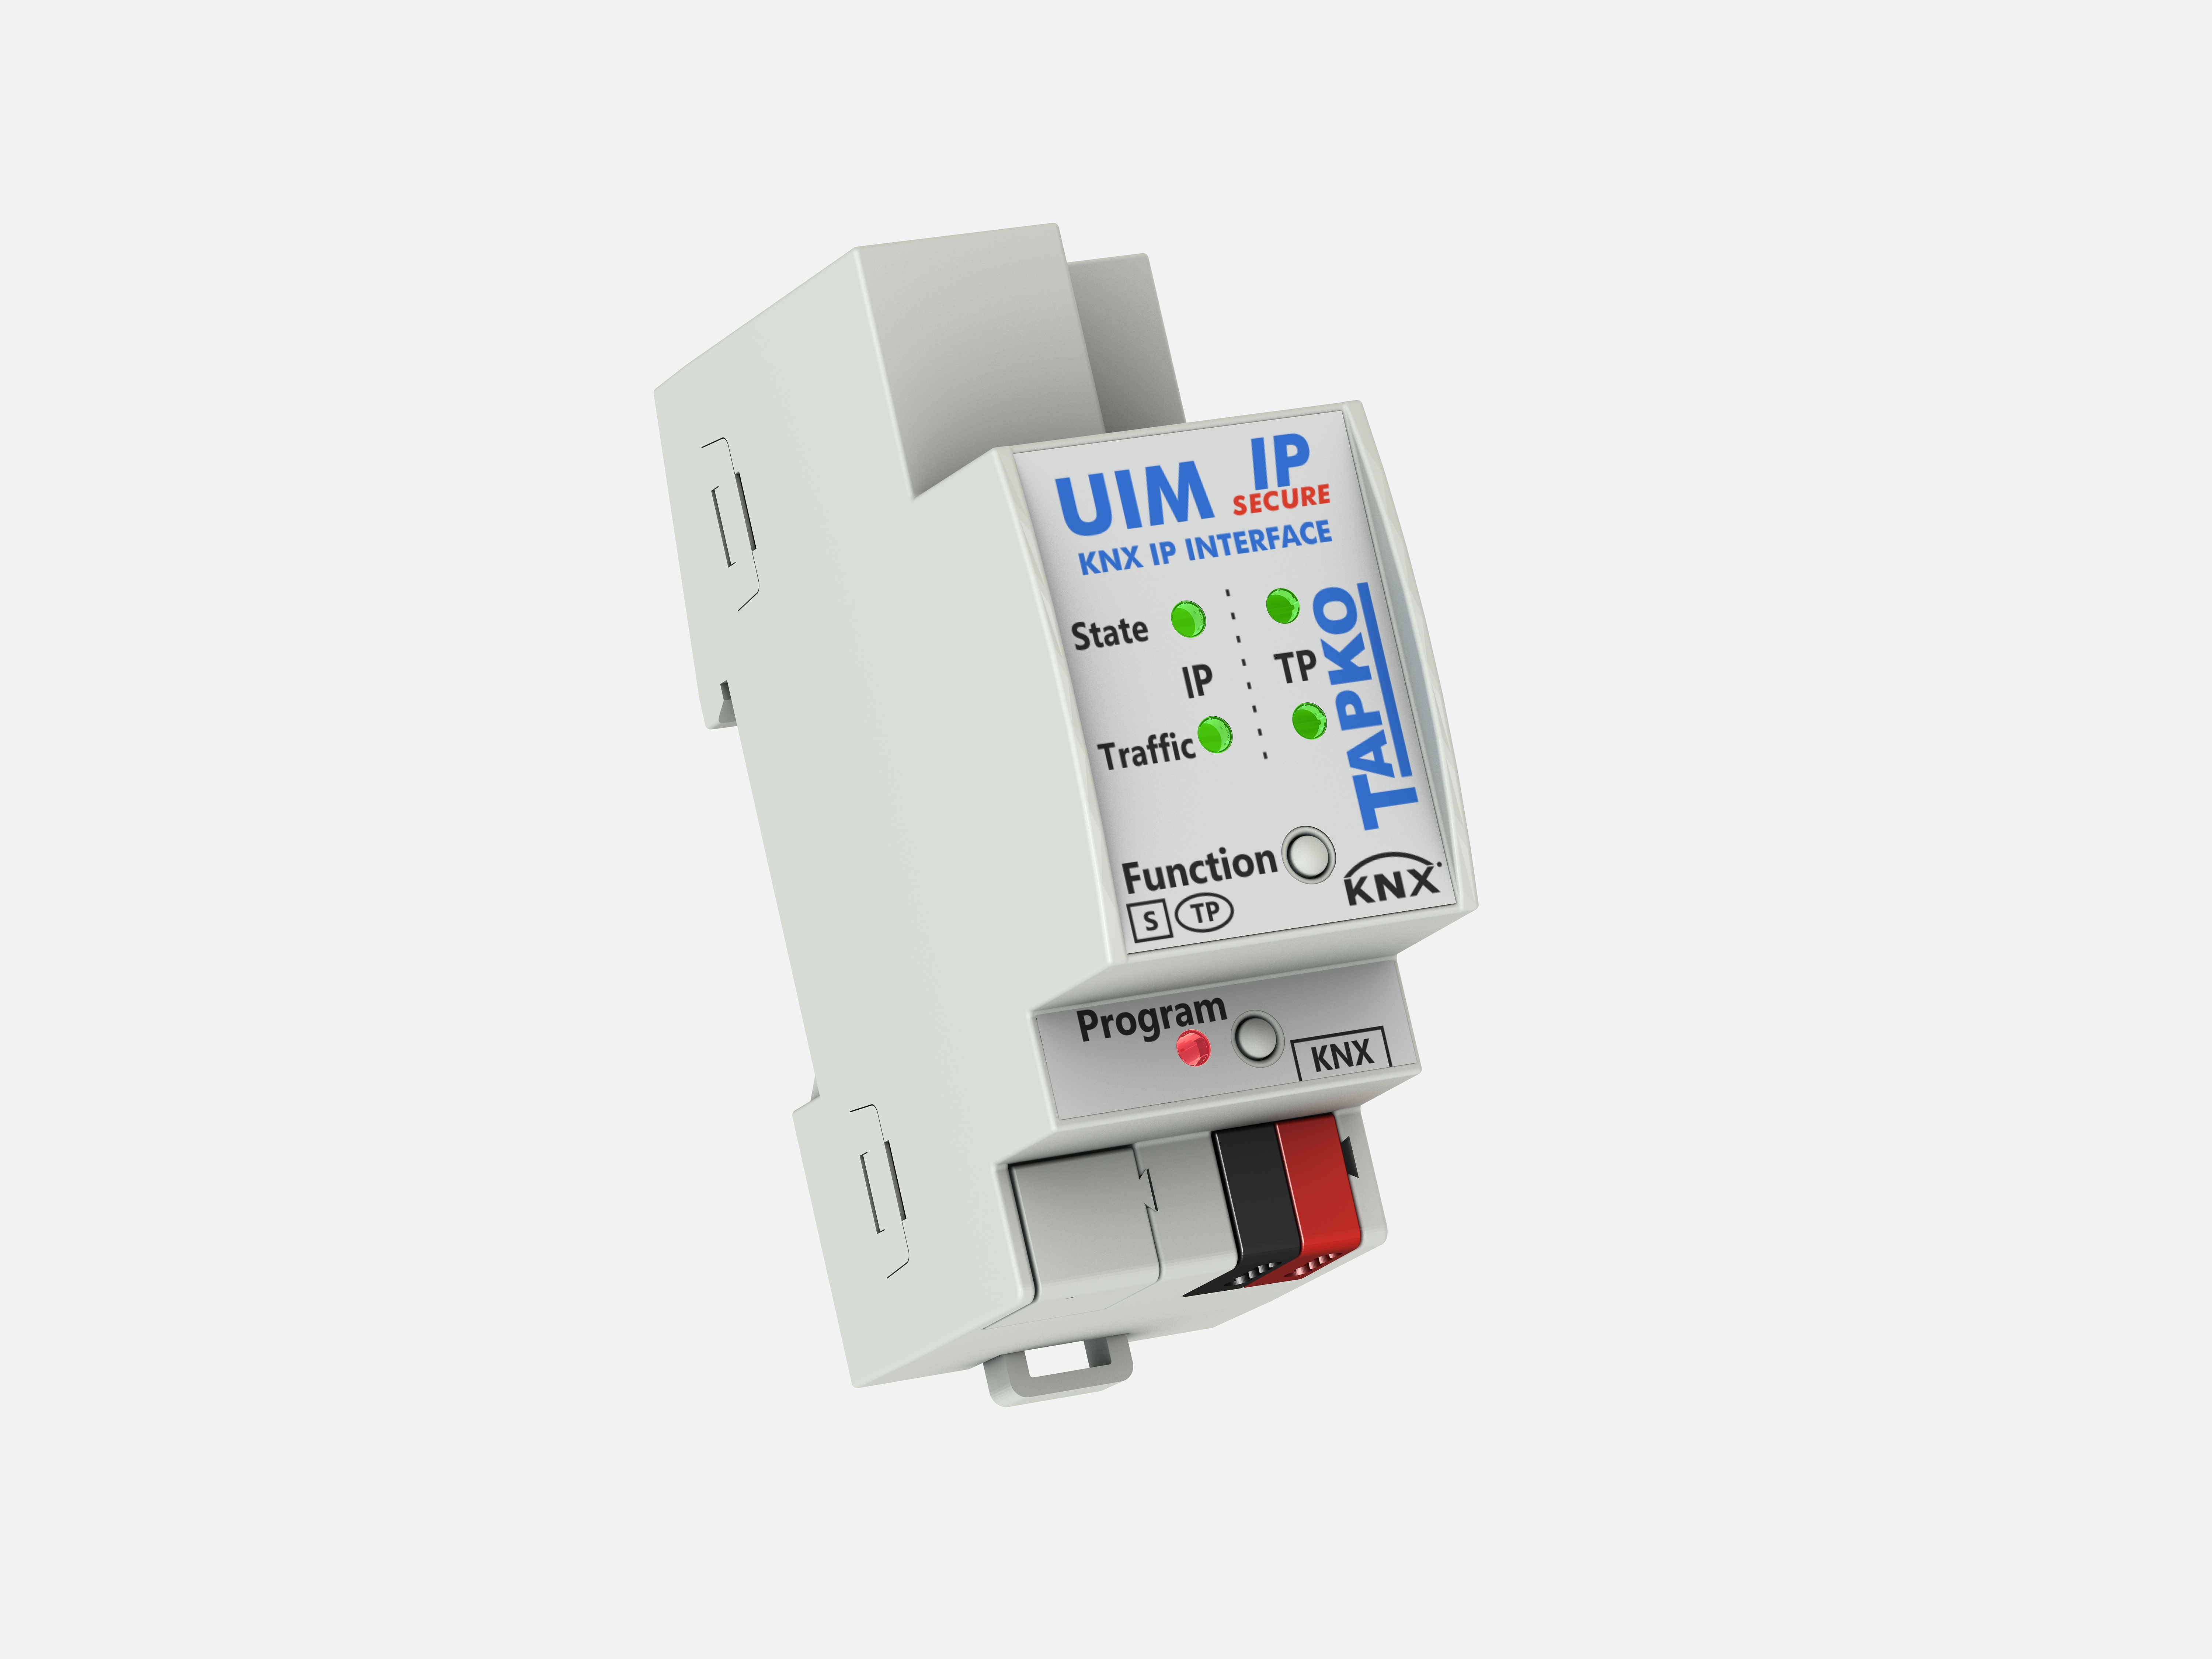 UIMip-Sec: KNX IP Interface secure